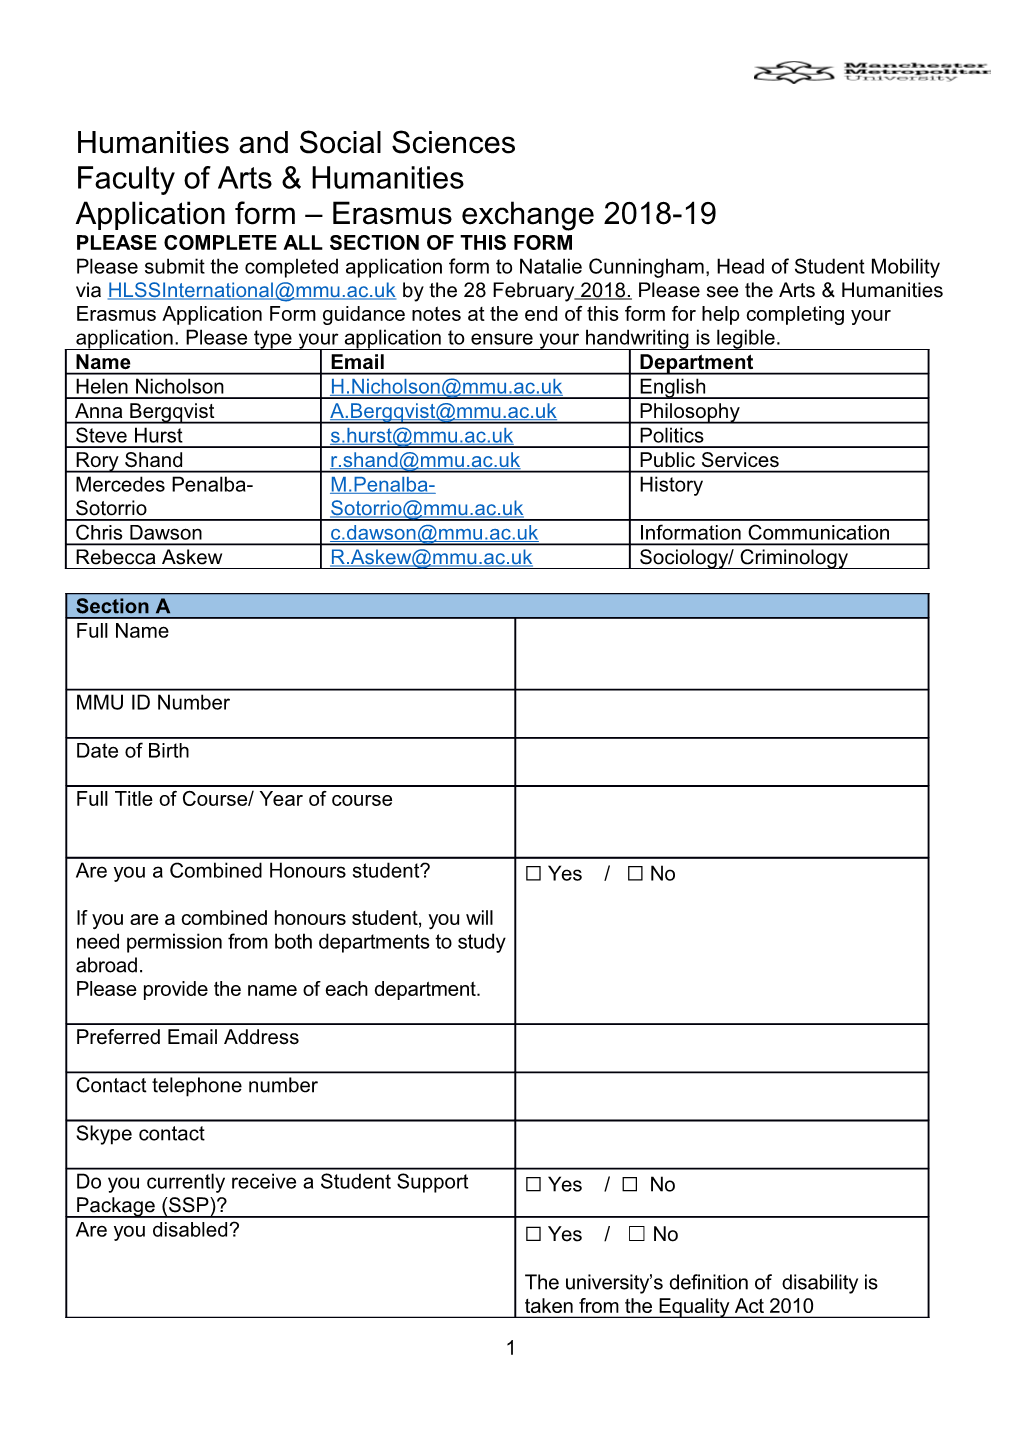 Please Complete All Section of This Form